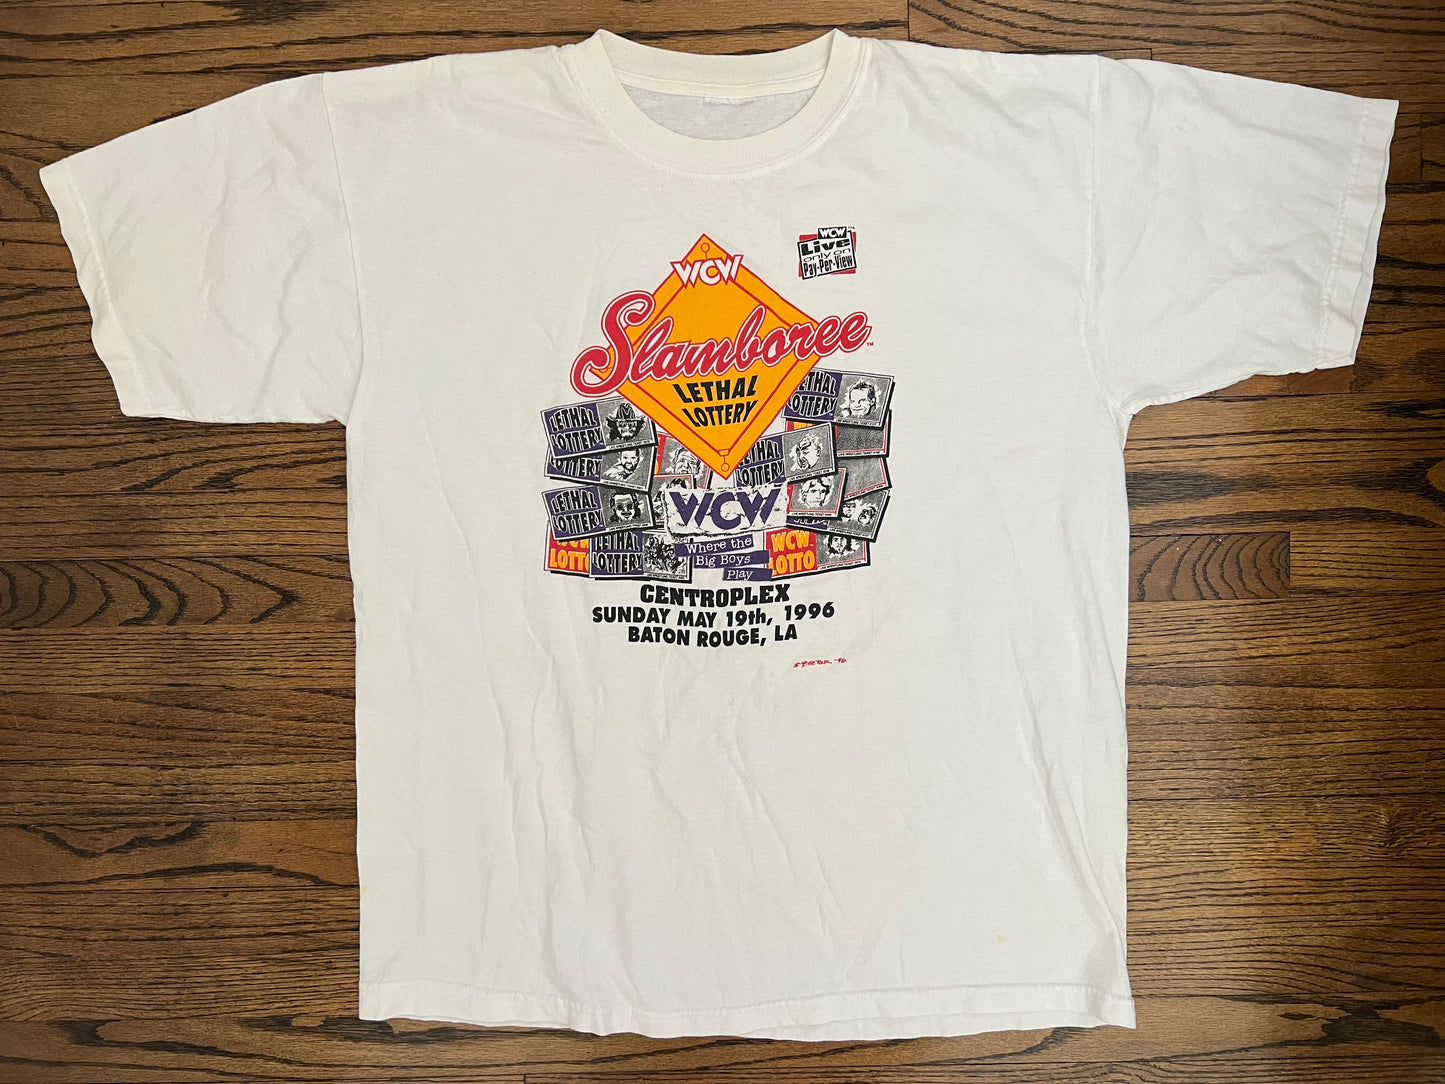 1996 WCW Slamboree shirt featuring Kevin Sullivan, Arn Anderson, The Nasty Boys, Ric Flair, Sting, The Road Warriors, Jimmy Hart, Randy Savage, Lex Luger and The Giant